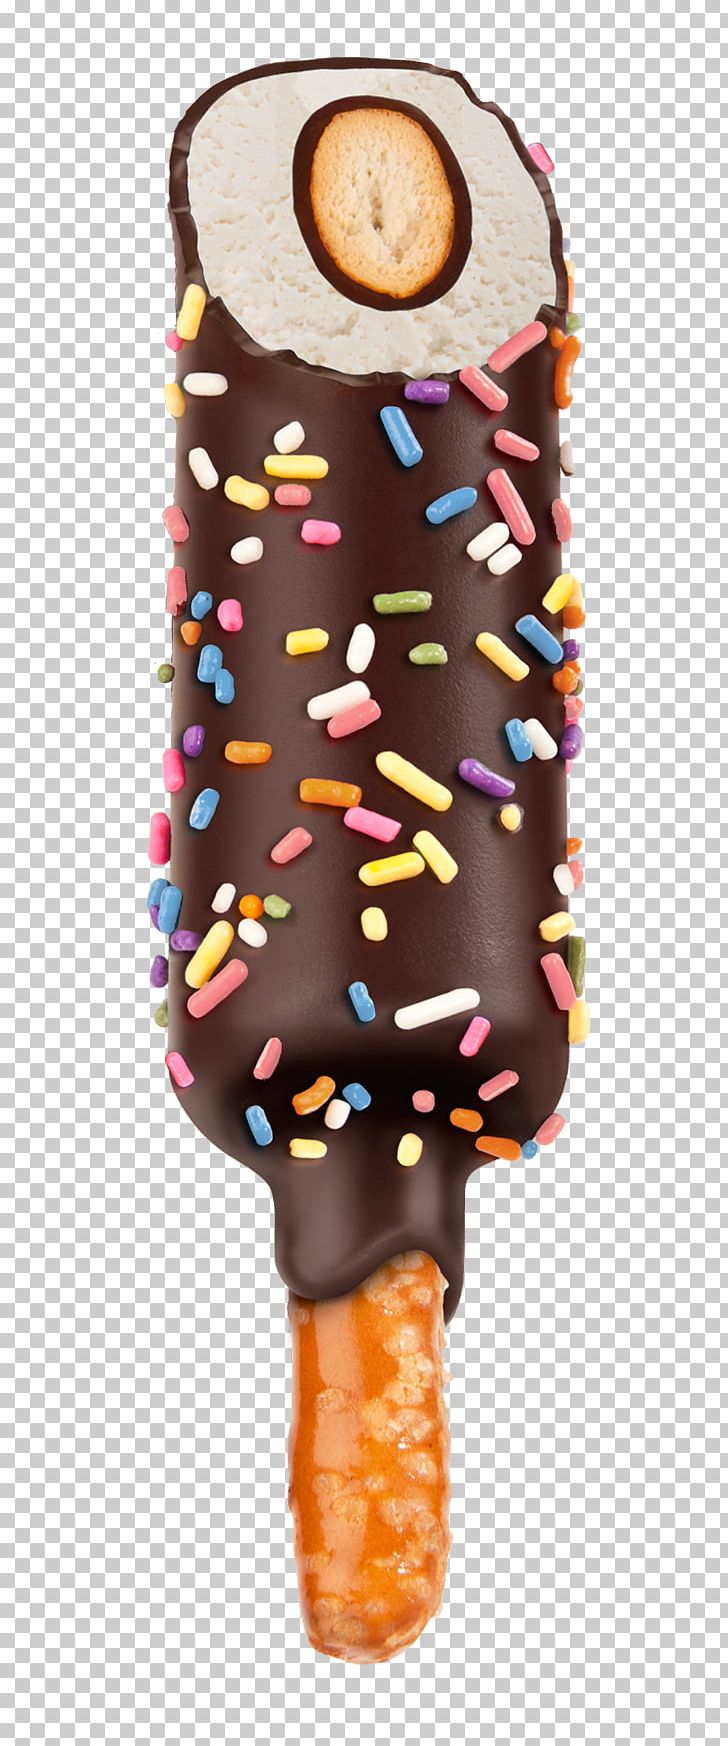 Ice Cream Cones Pretzel Saltisweet Ice Cream Factory PNG, Clipart, Biscuits, Confectionery, Cream, Dessert, Food Free PNG Download